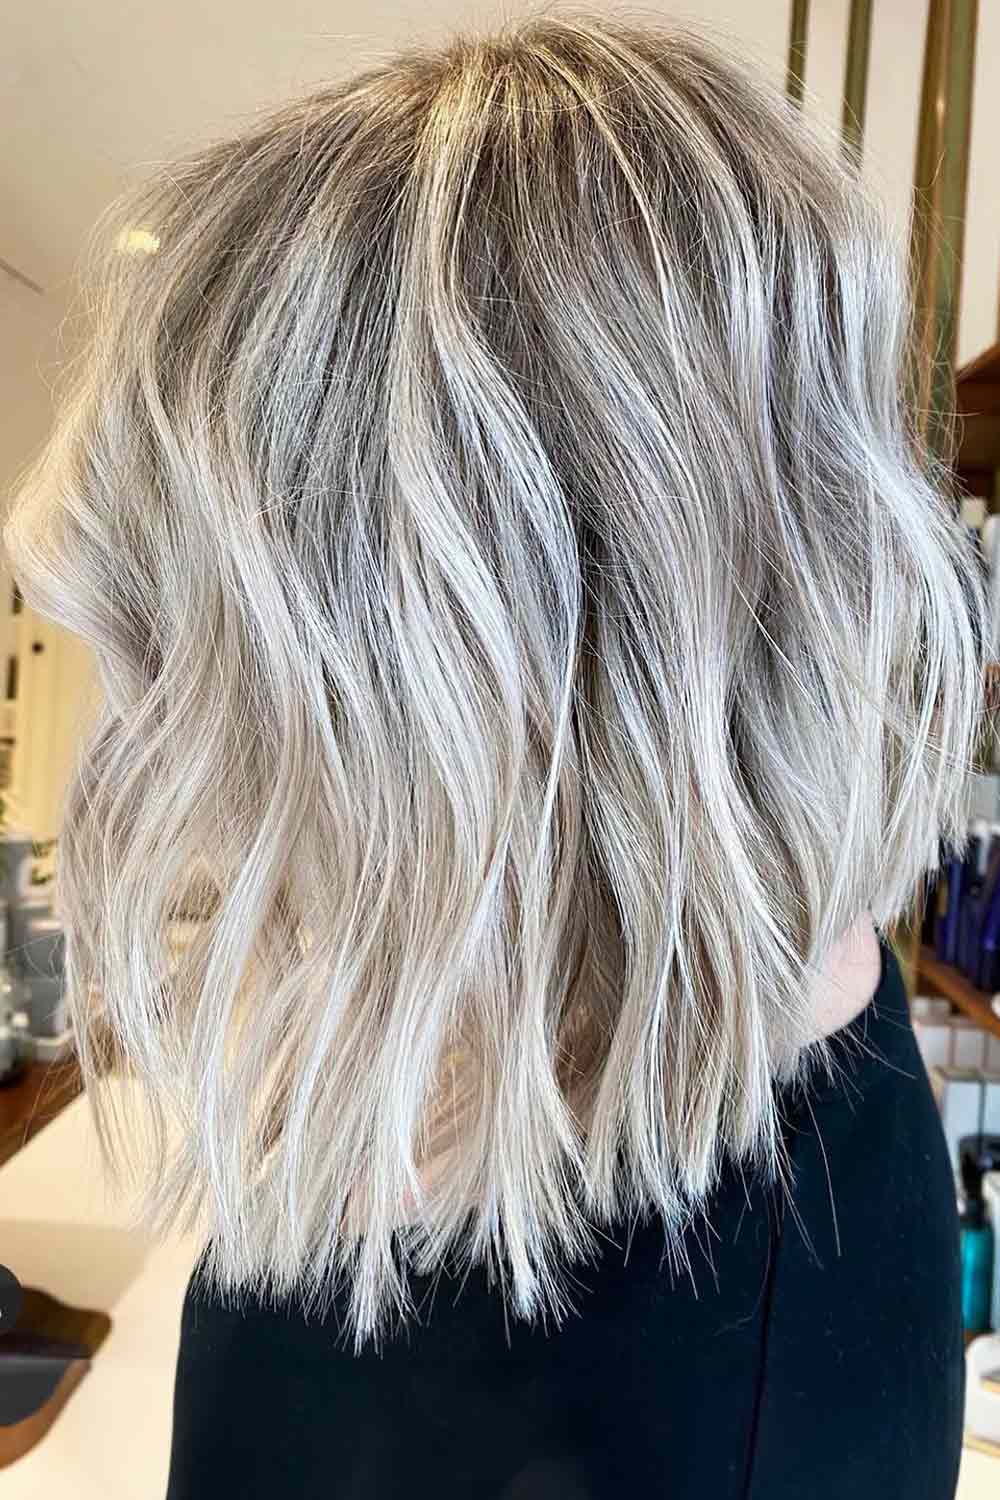 Ice Blonde Hair Color #blondehair #blondehaircolor #blonde